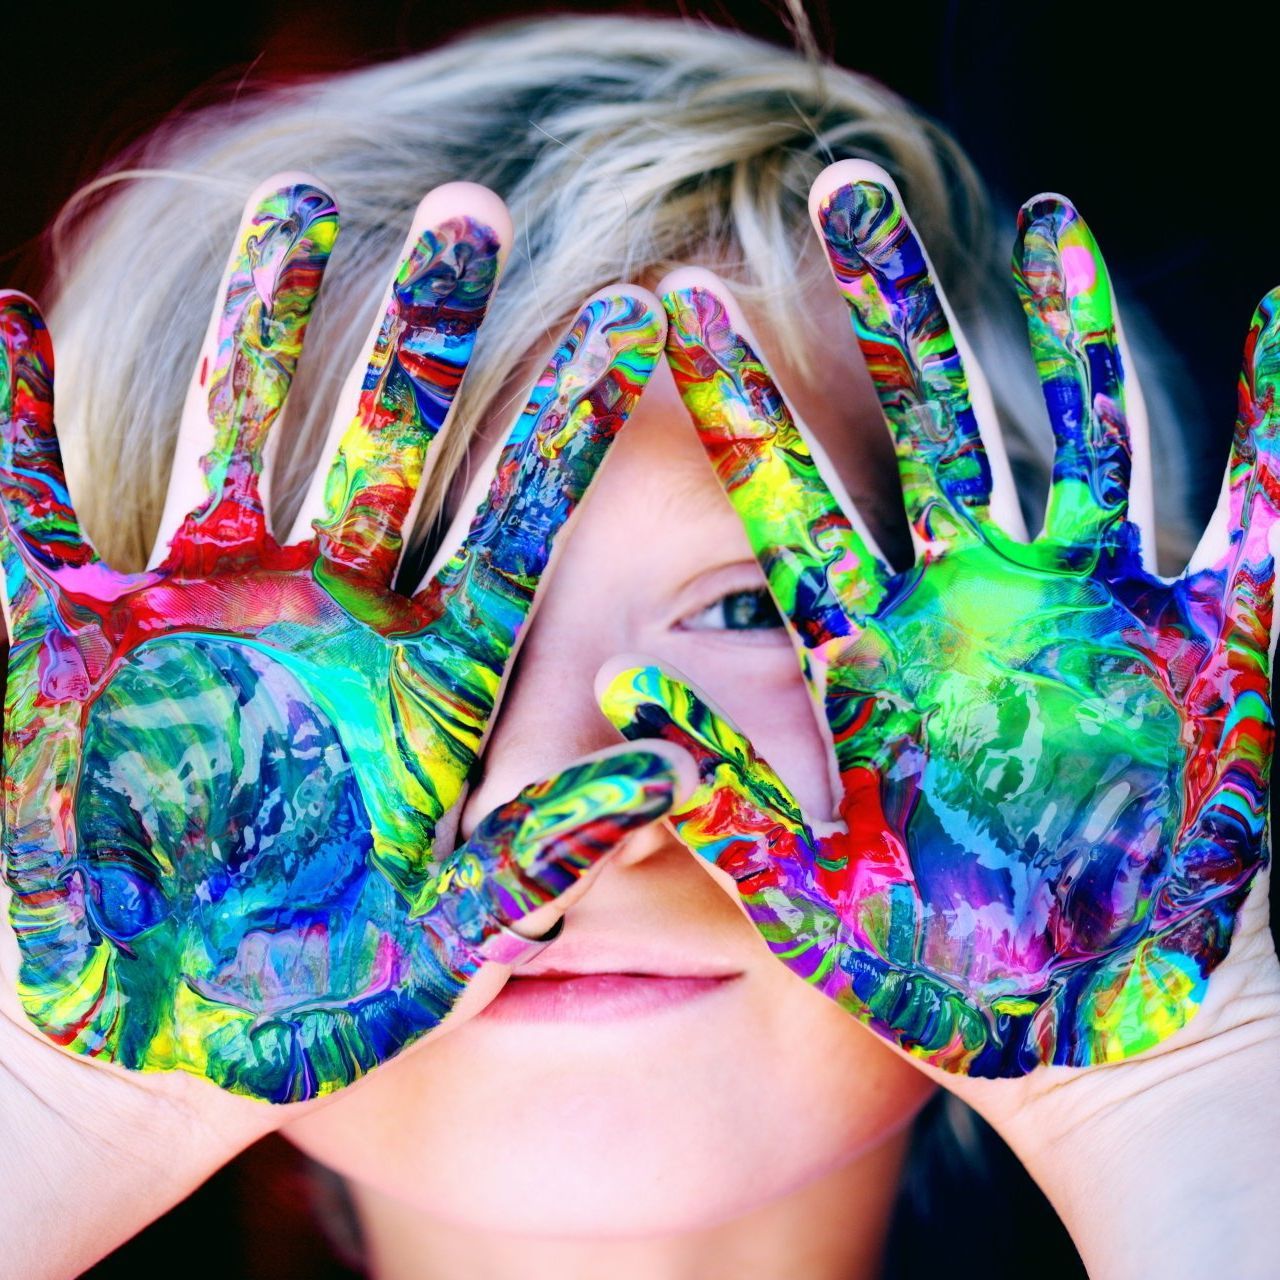 a child covering face with hands painted in different colors representing Play Therapy for children.